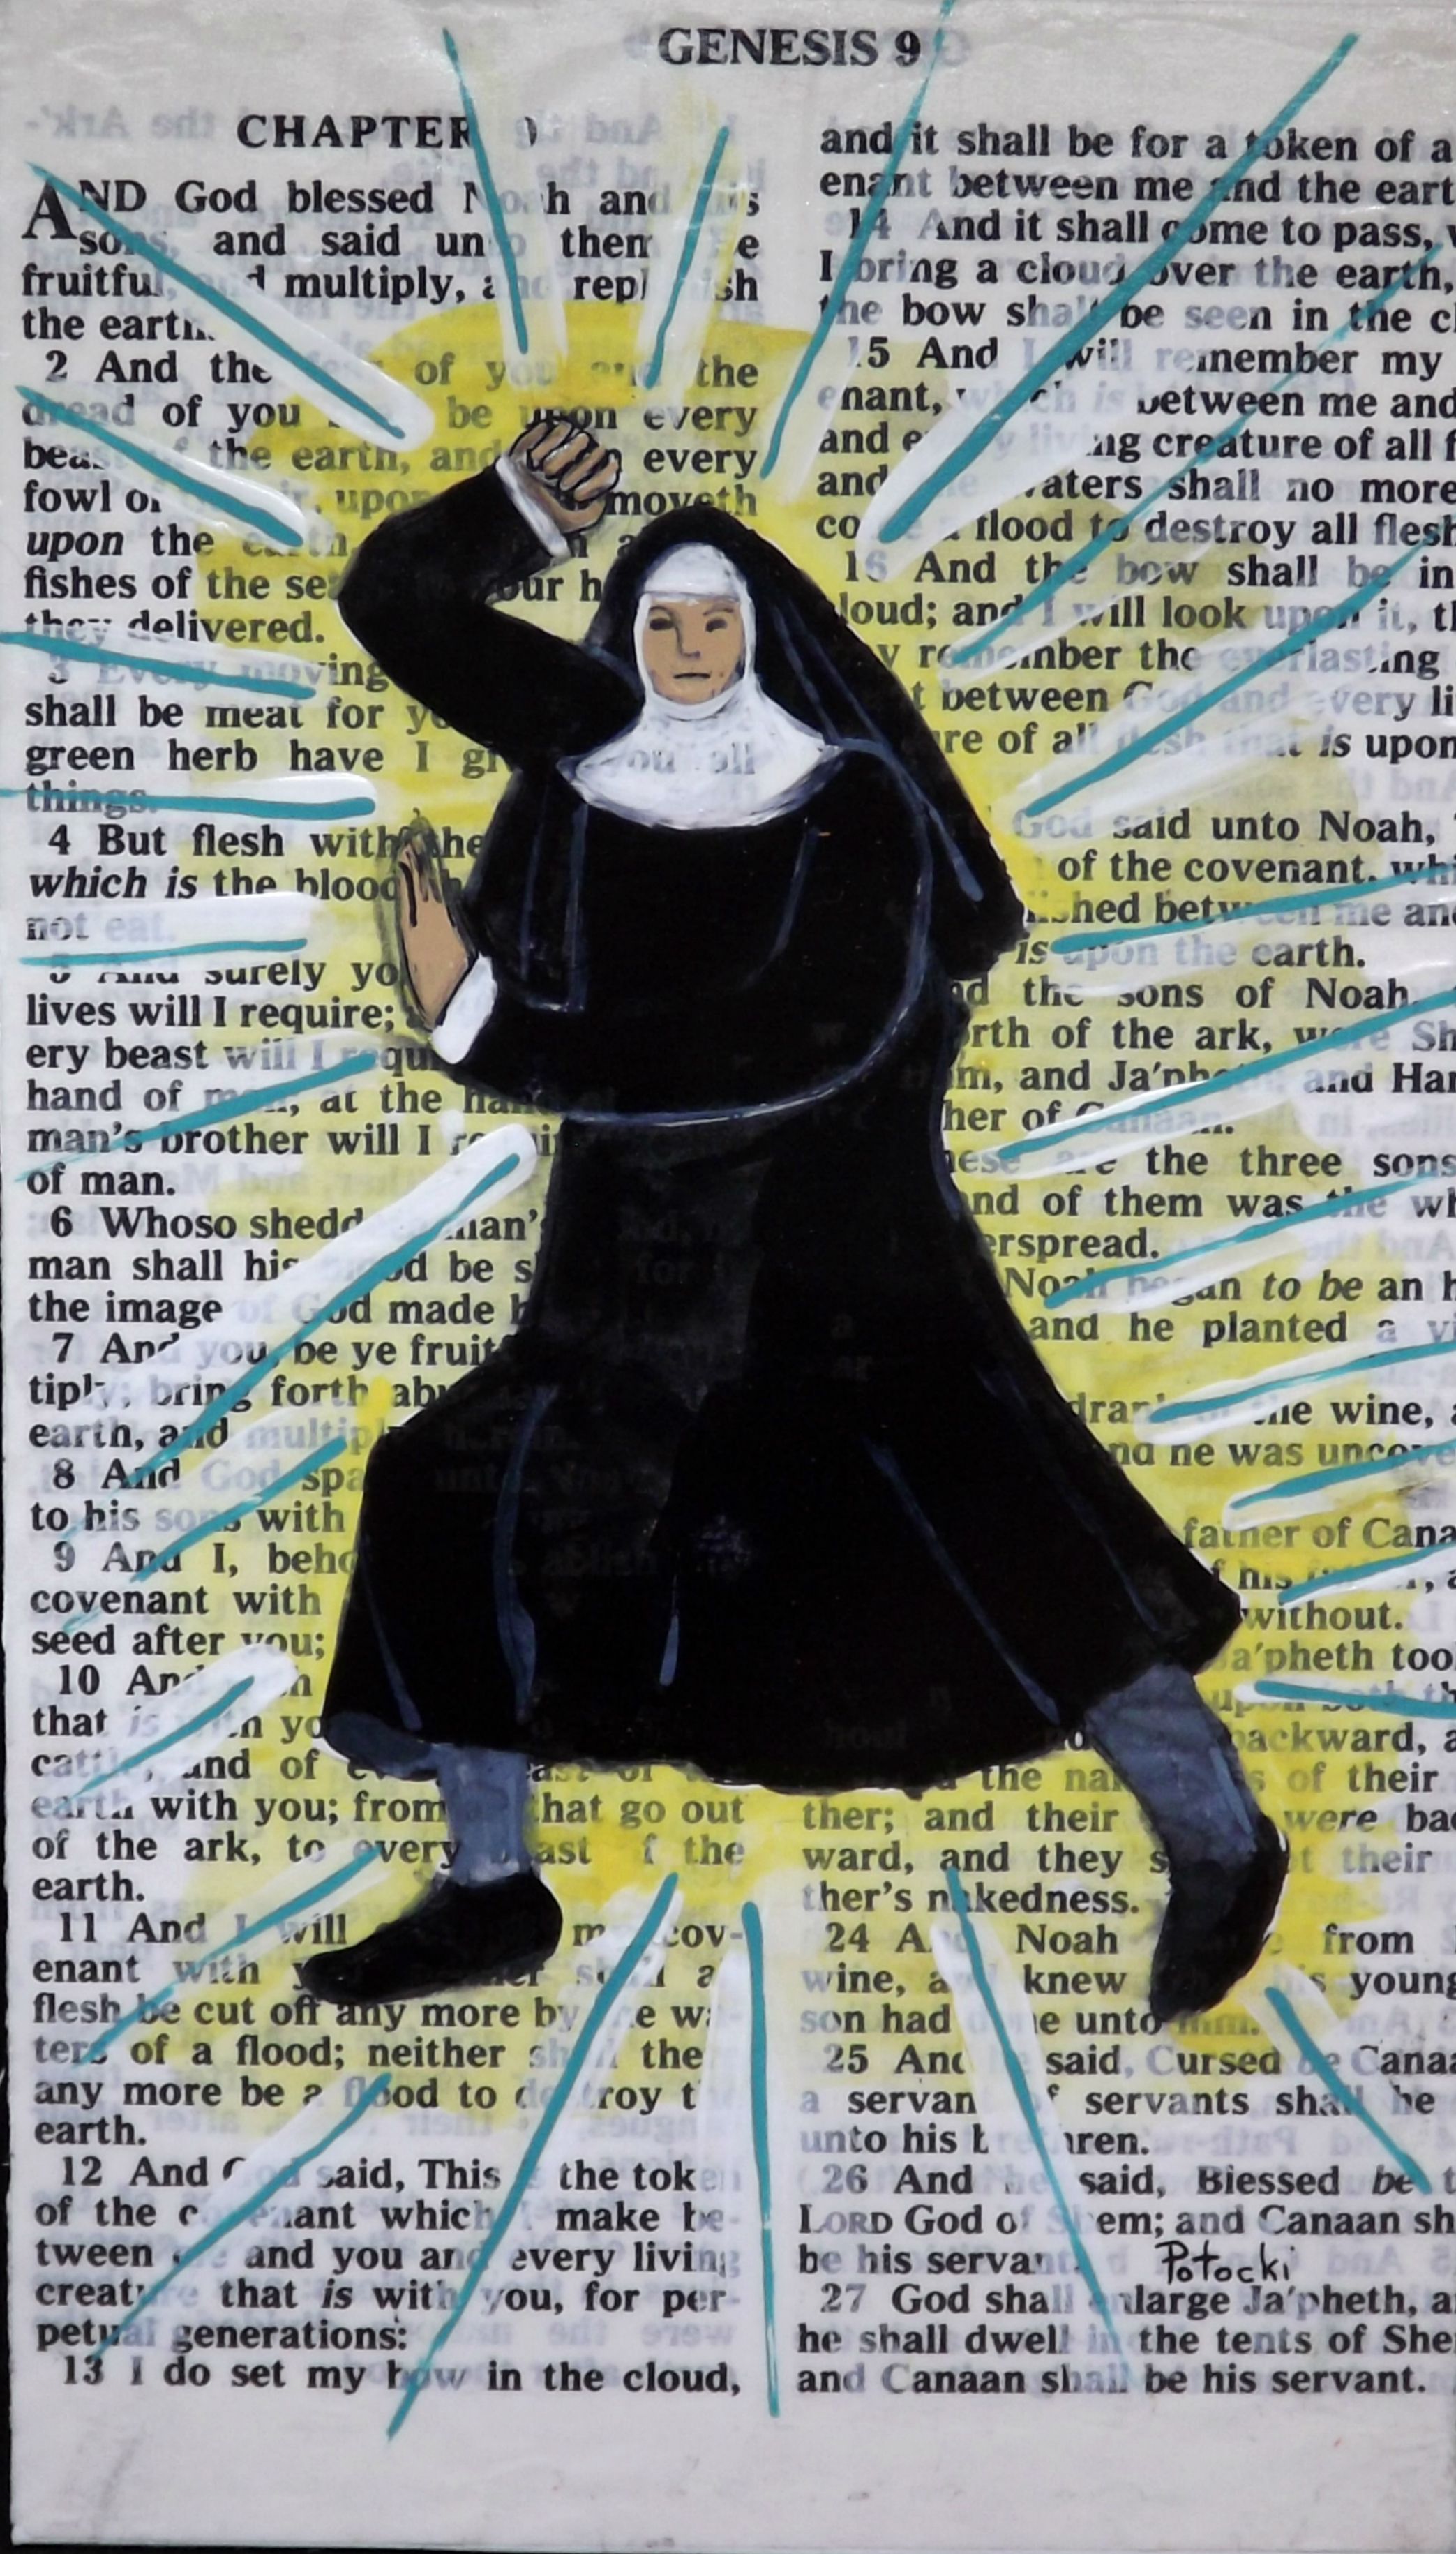 Sister-Fist-of-Righteousness-Original-Painting-on-Bible-Page-Art-Karate-Nun  Sister-Fist-of-Righteousness-Original-Painting-on-Bible-Page-Art-Karate-Nun Have one to sell? Sell now Sister Fist of Righteousness Original Painting on Bible Page